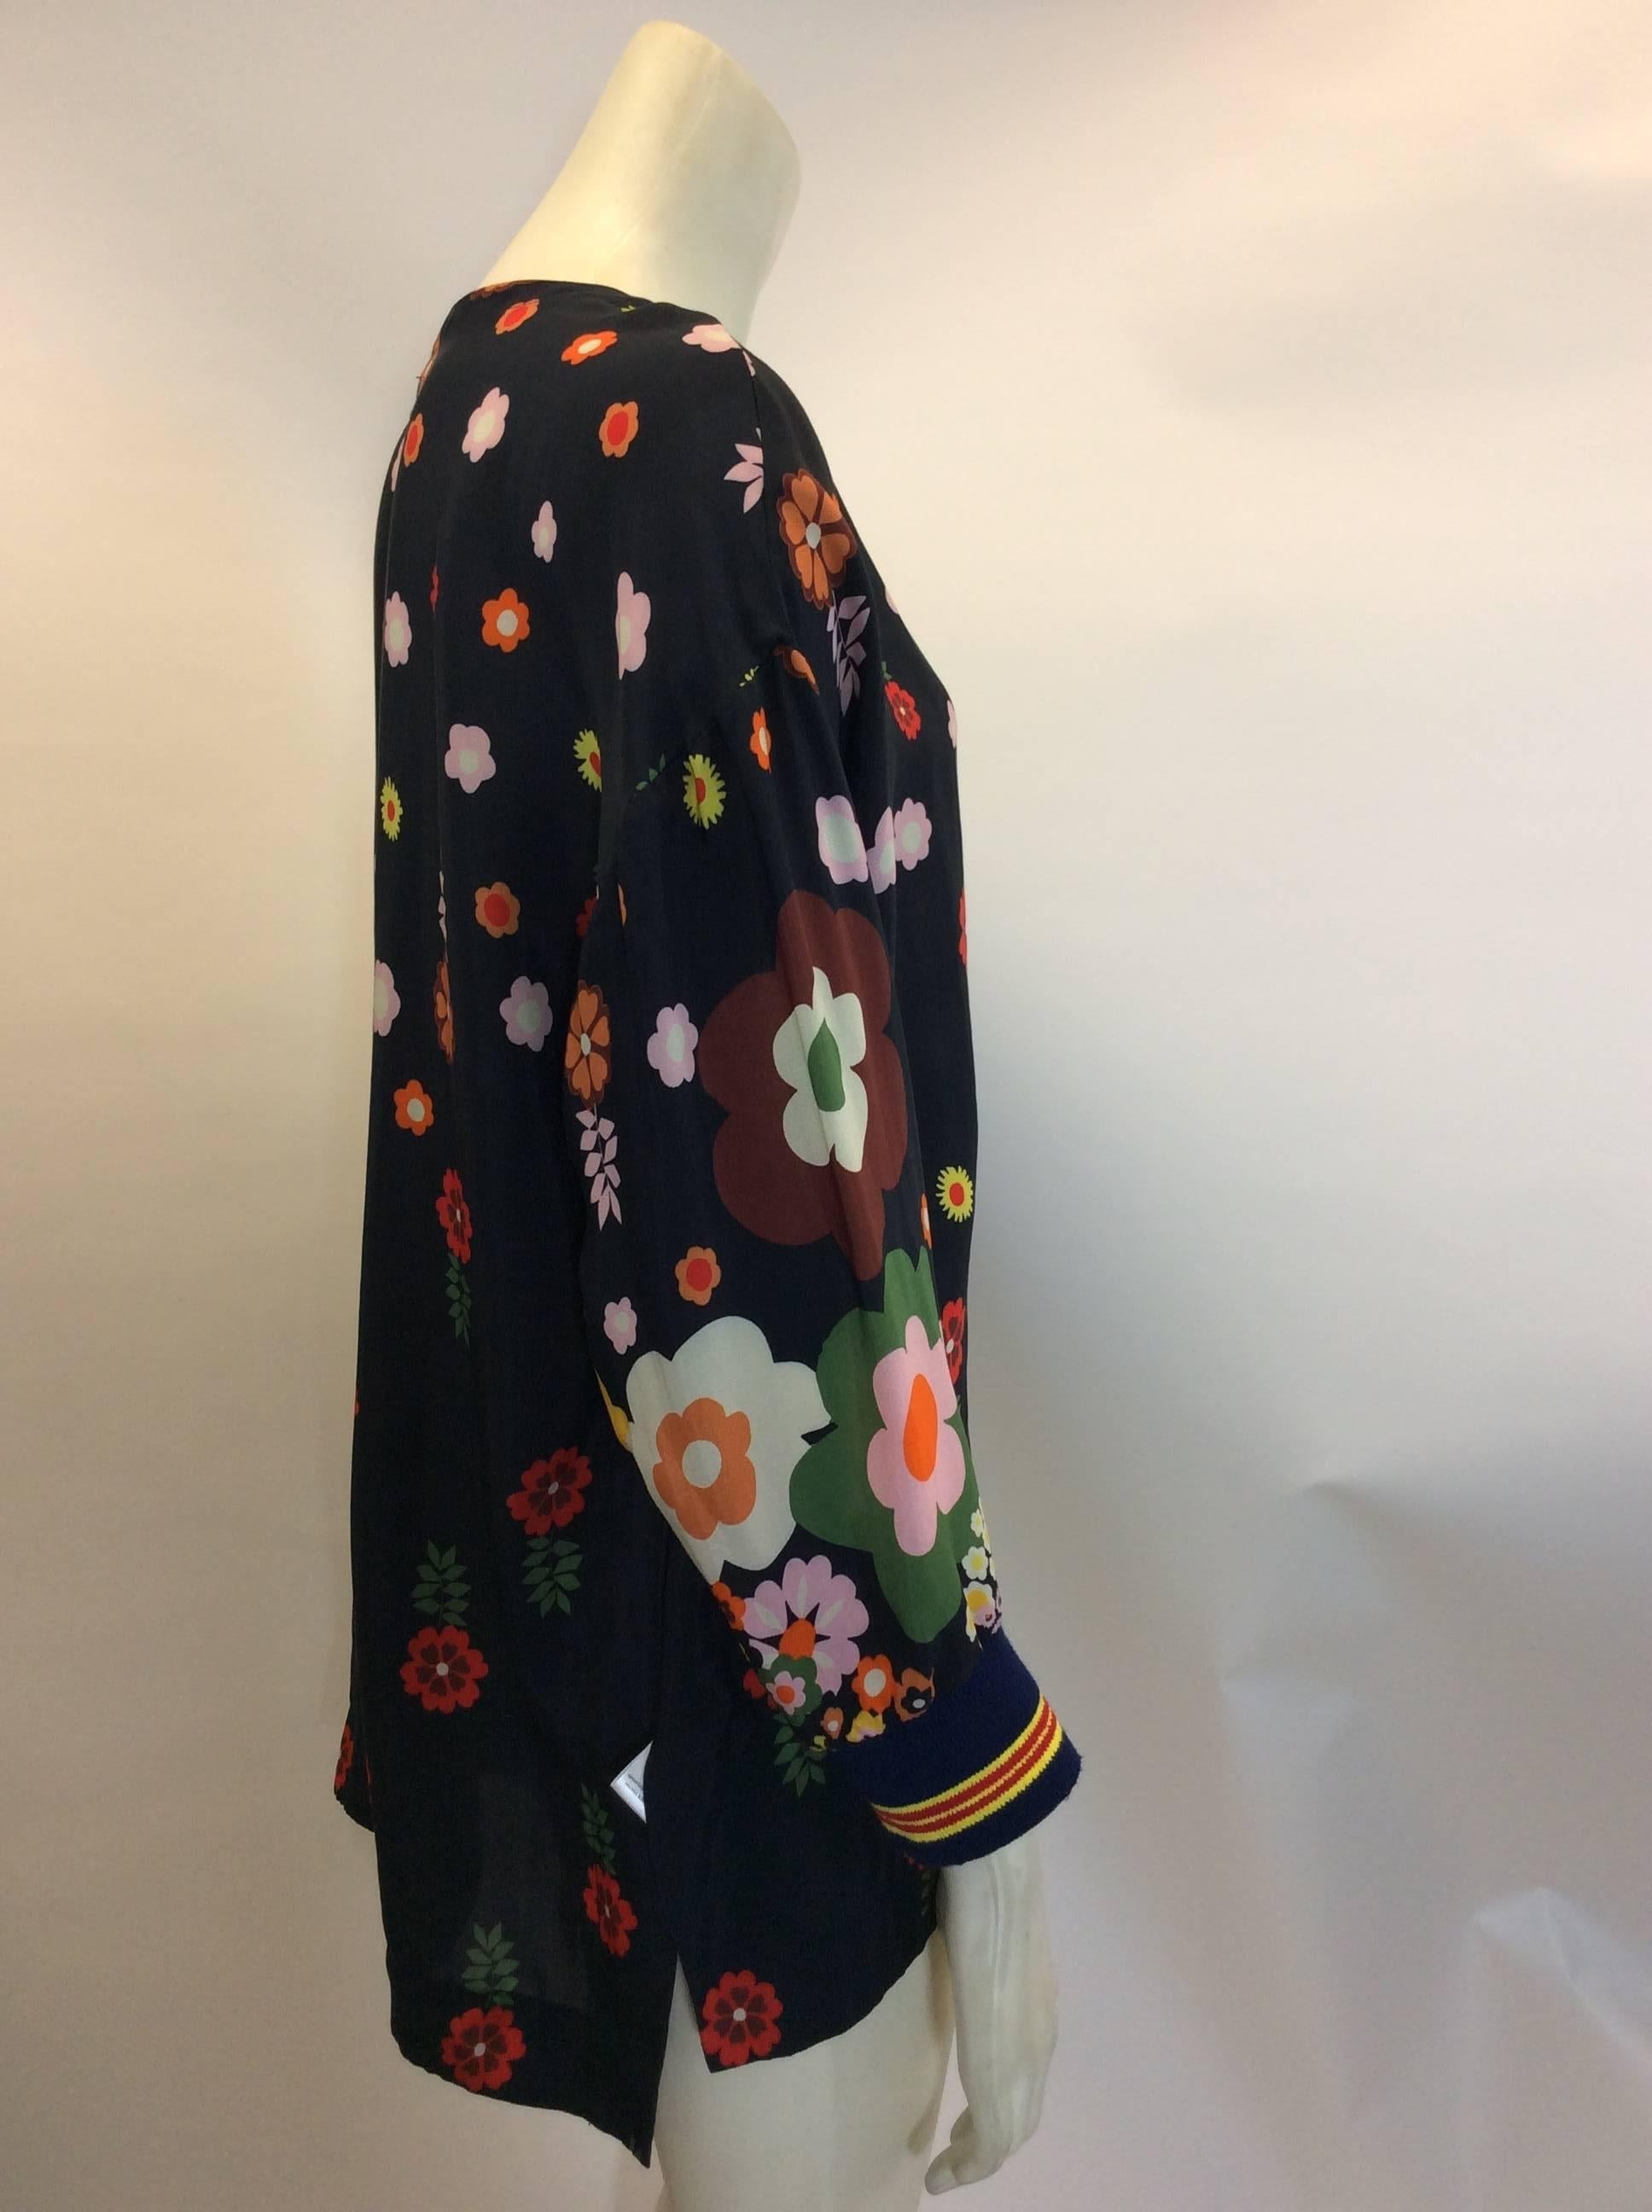 Warm Floral Printed Long Sleeve Blouse In Excellent Condition For Sale In Narberth, PA